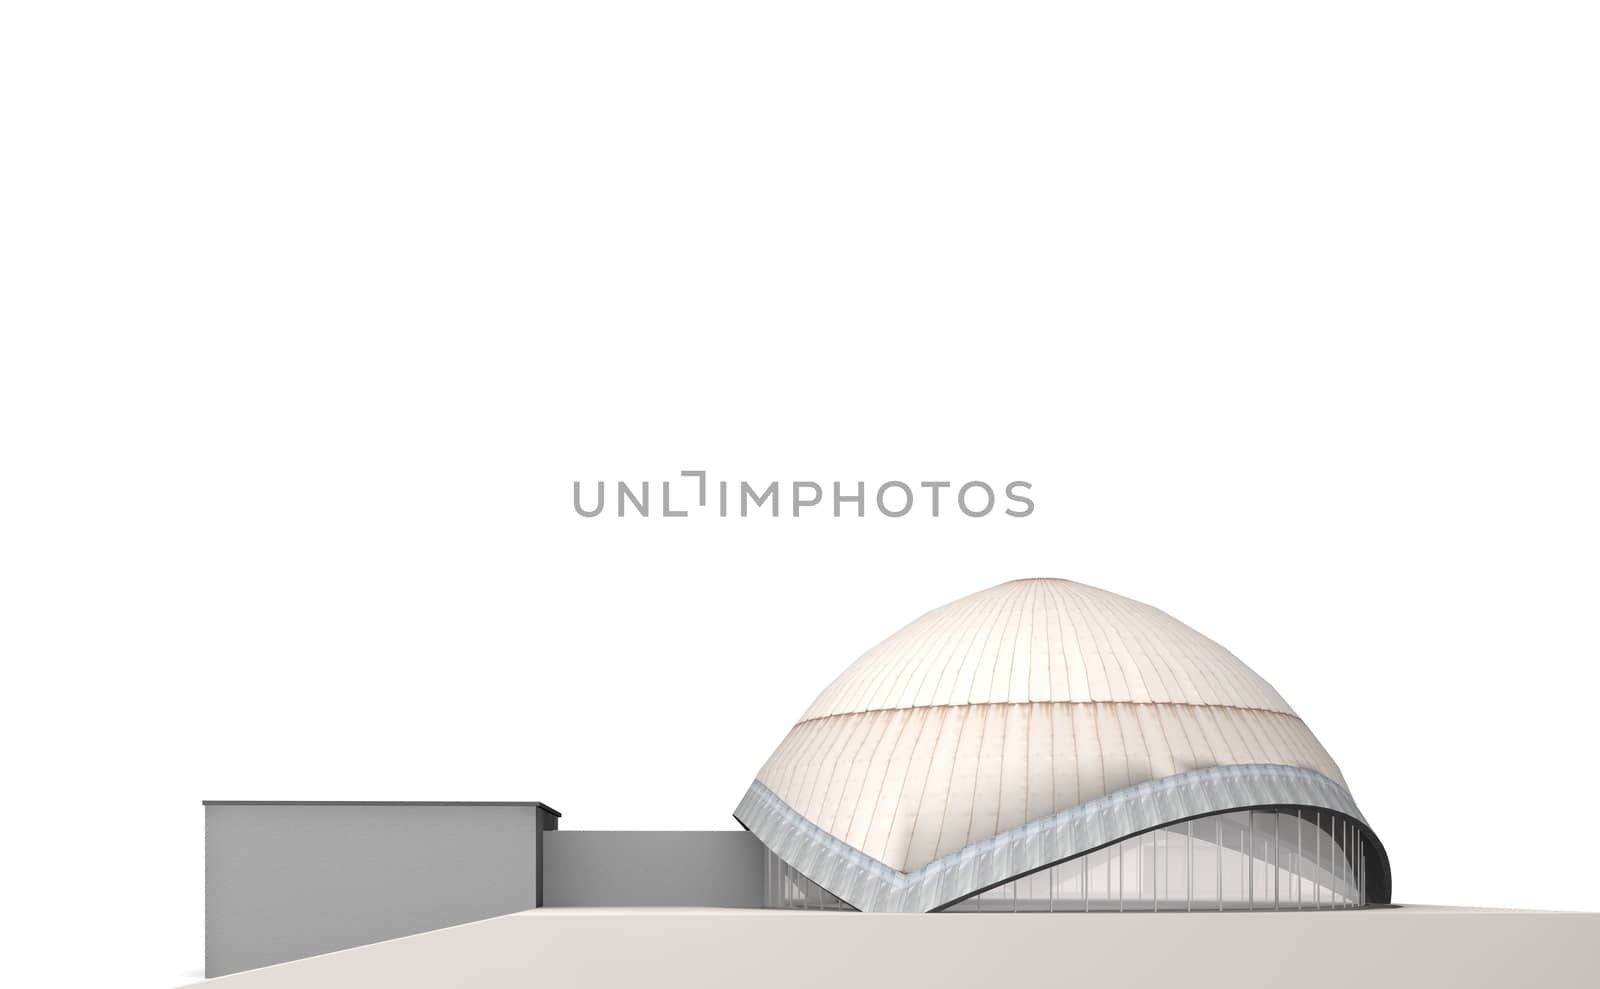 The Major Zeiss planetarium in Berlin is one of the largest modern stellar theaters in Europe.